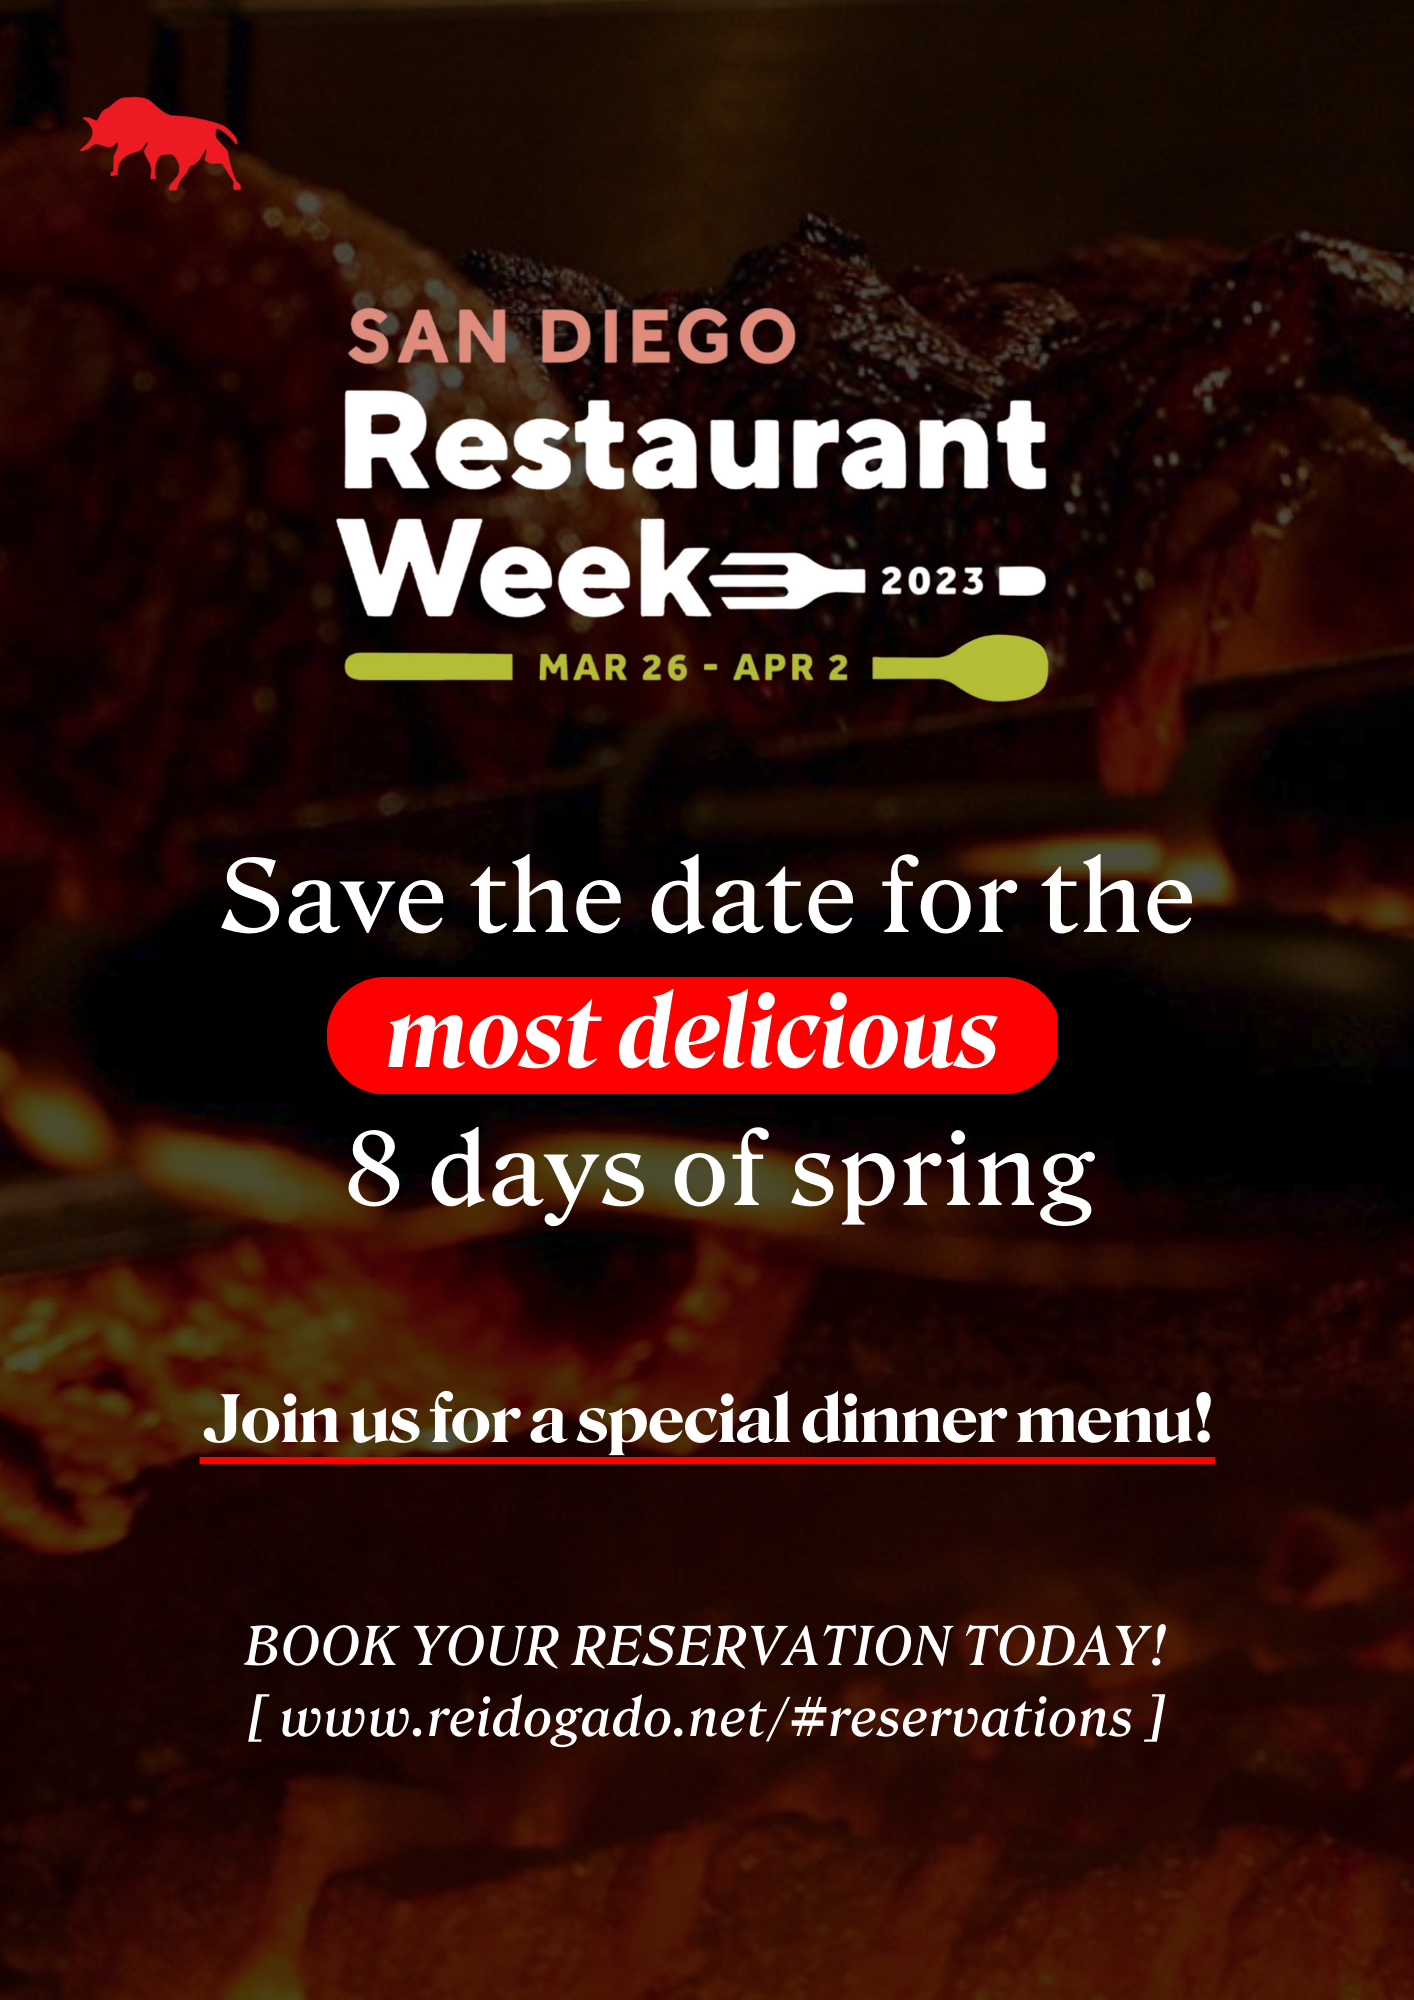 Restaurant Week - Save the Date: March 16th - April 7th